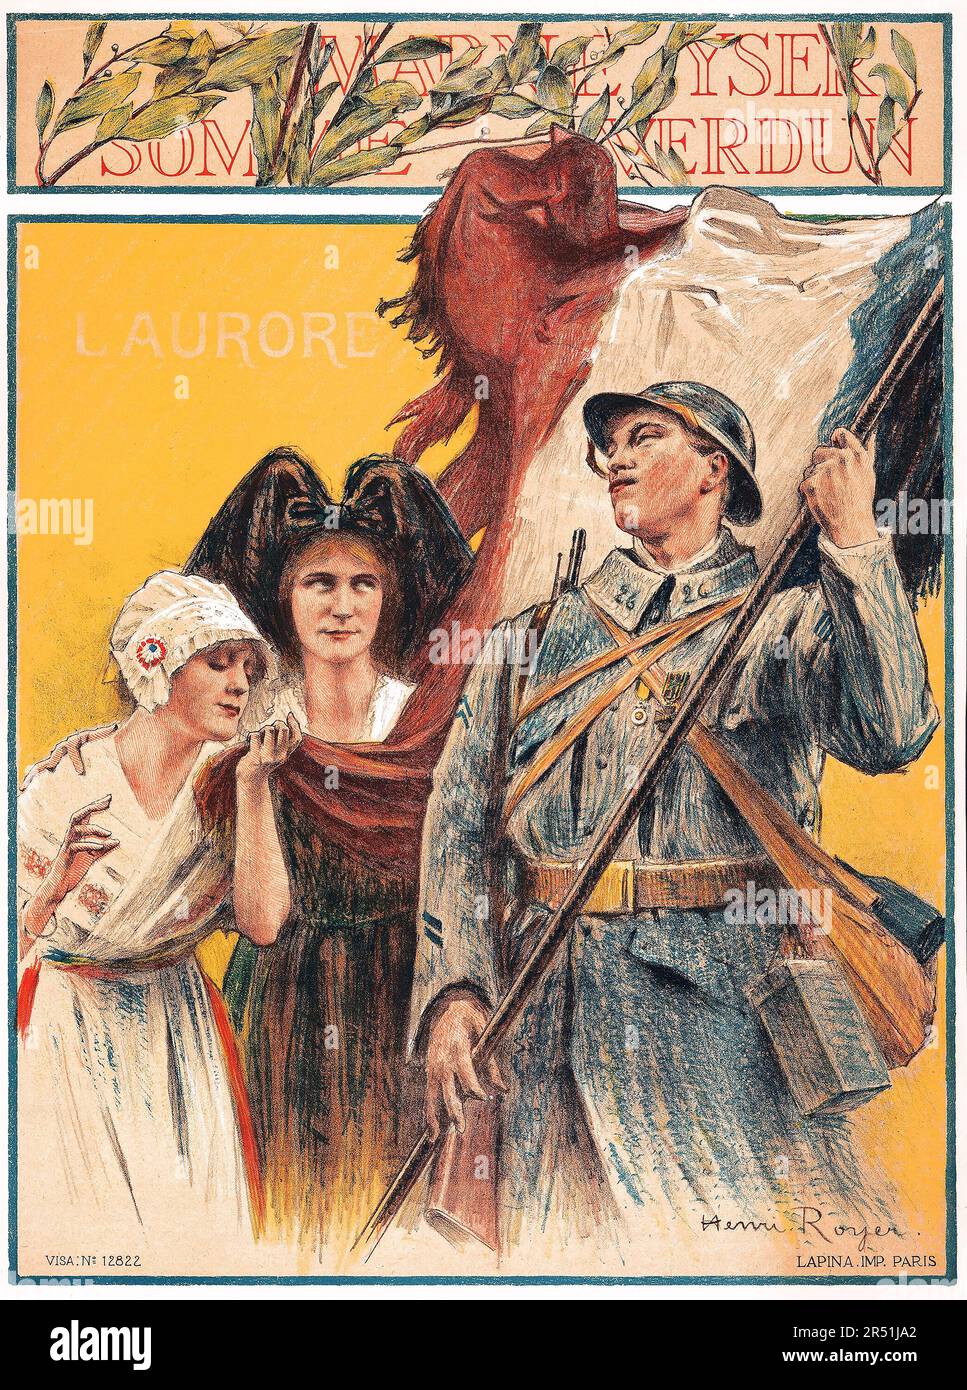 French World War I Propaganda (Lapina,1910s). French Moyenne - 'Marne, Yser, Somme, Verdun - L'aurore,' French soldier with French flag - Henri Royer Artwork Stock Photo